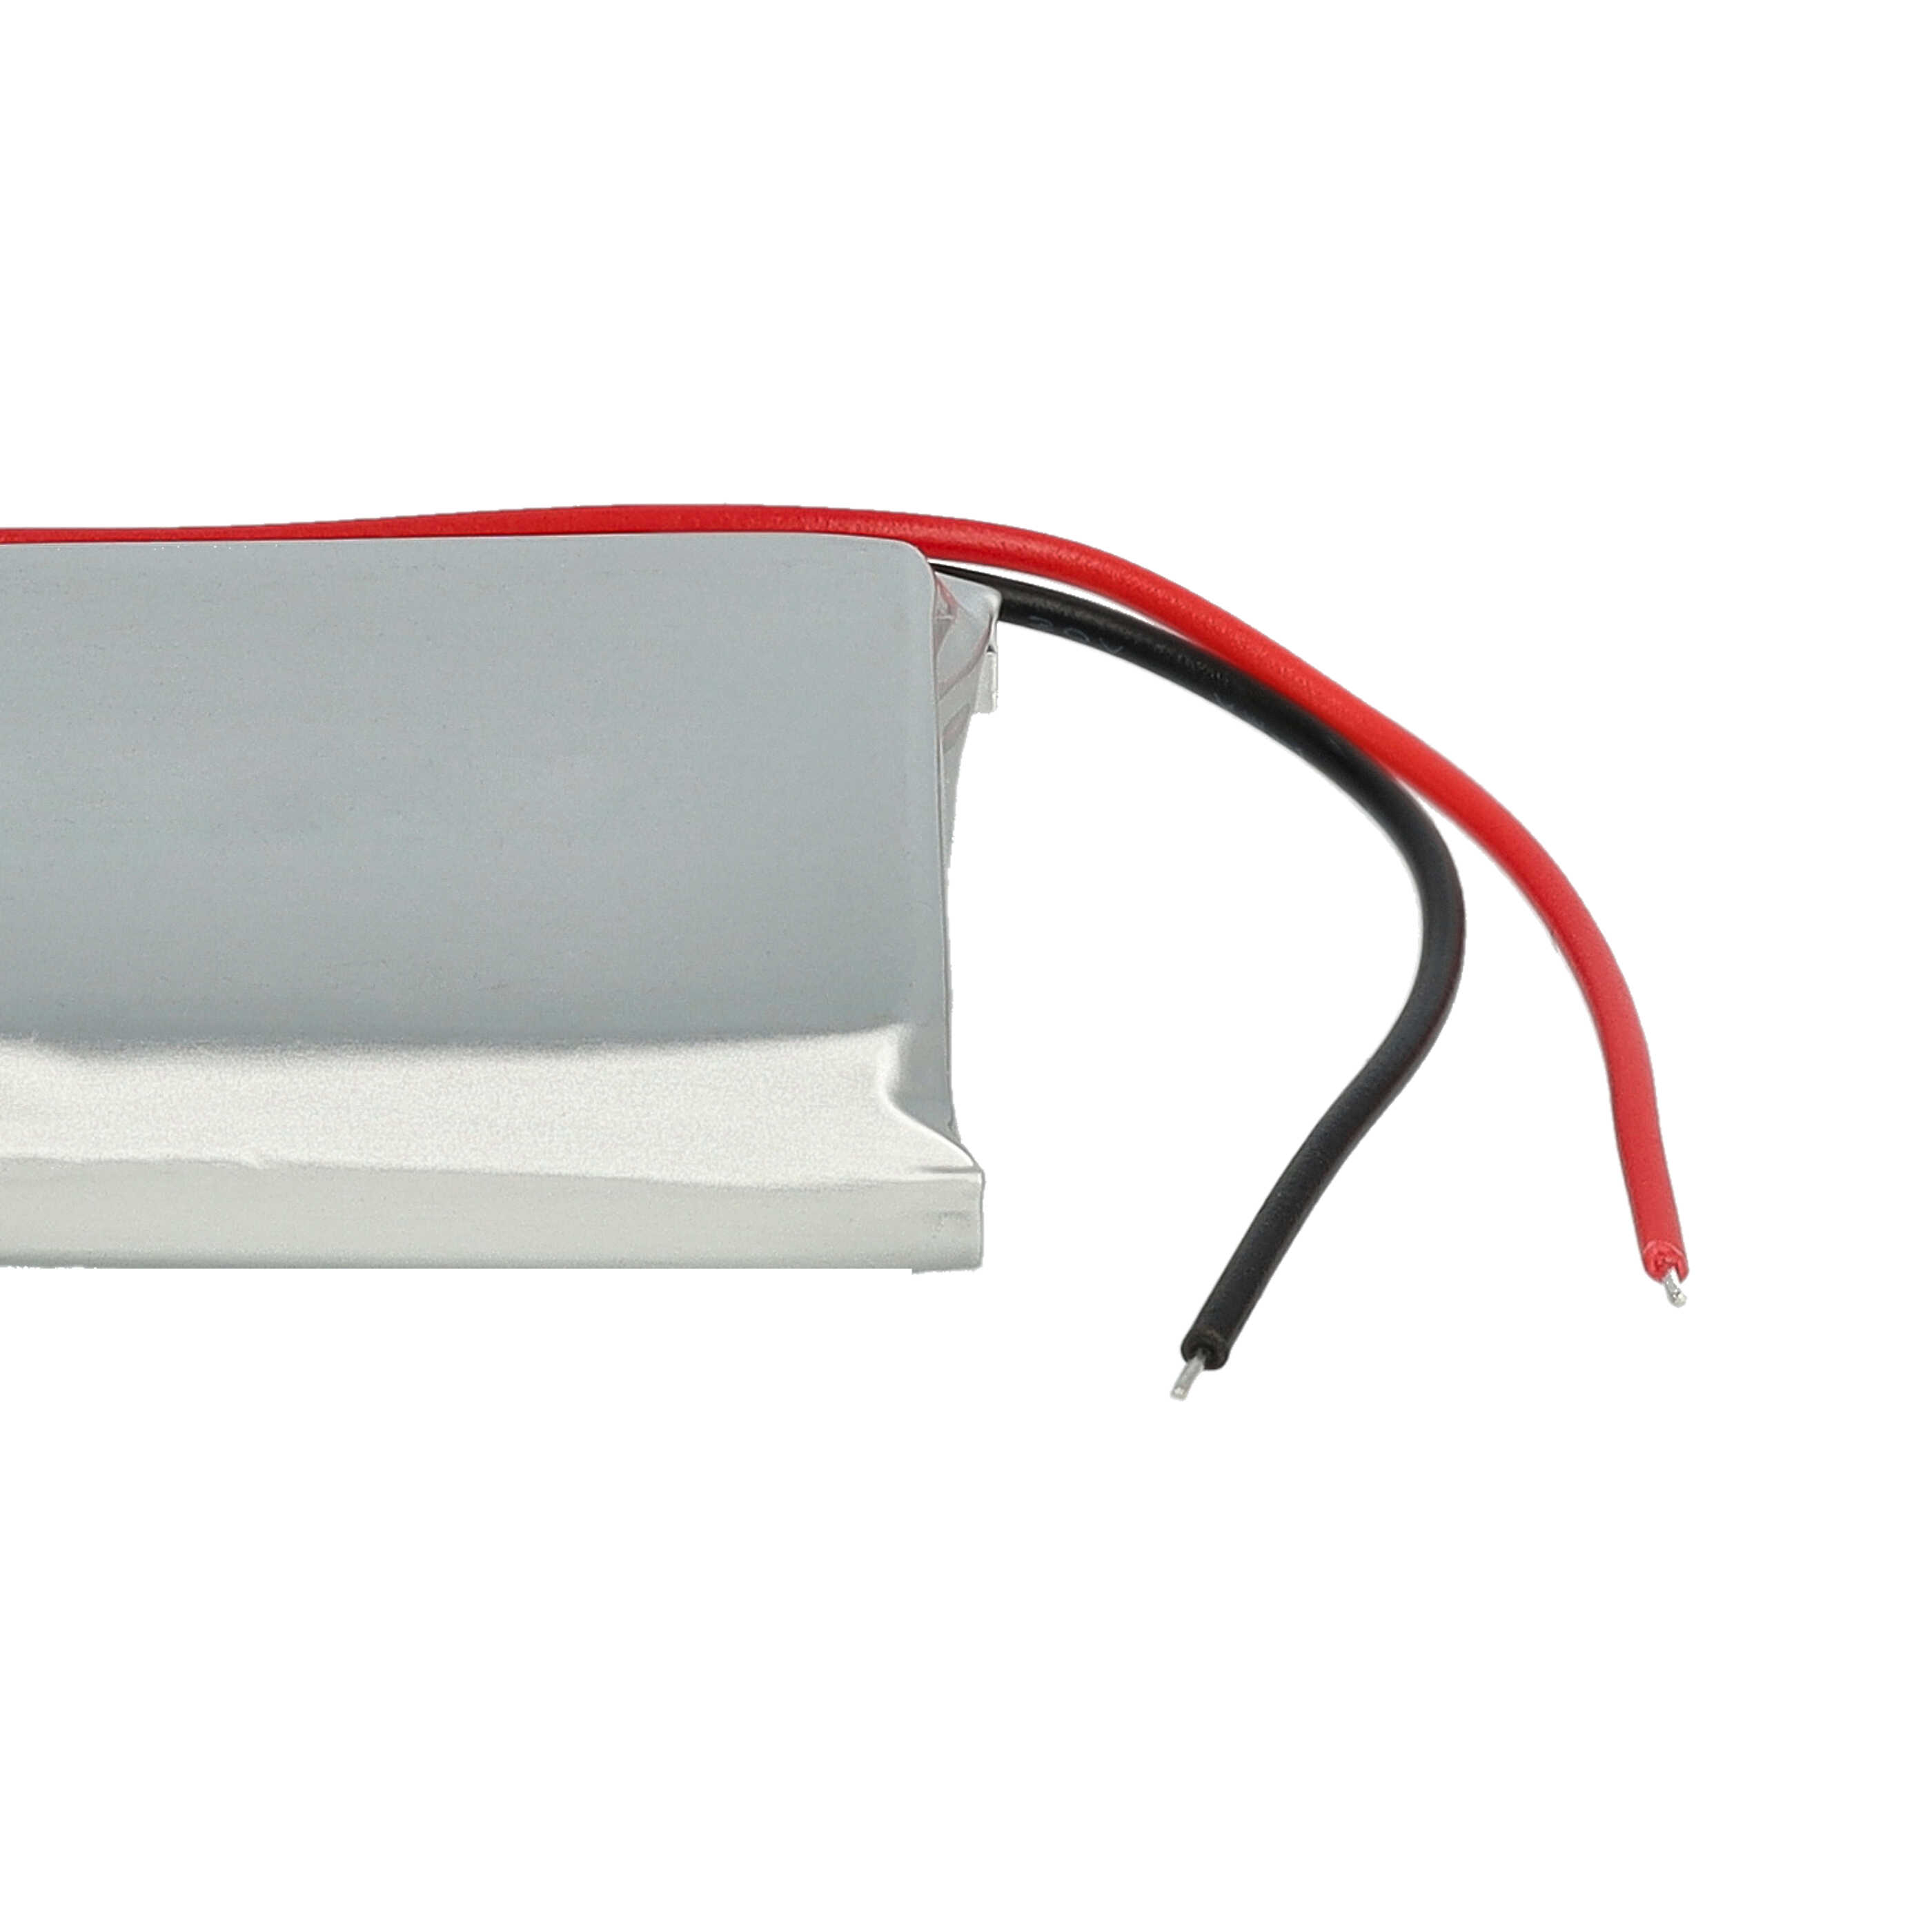 Wireless Headset Battery Replacement for Bang & Olufsen AEC643333A - 500mAh 3.7V Li-polymer